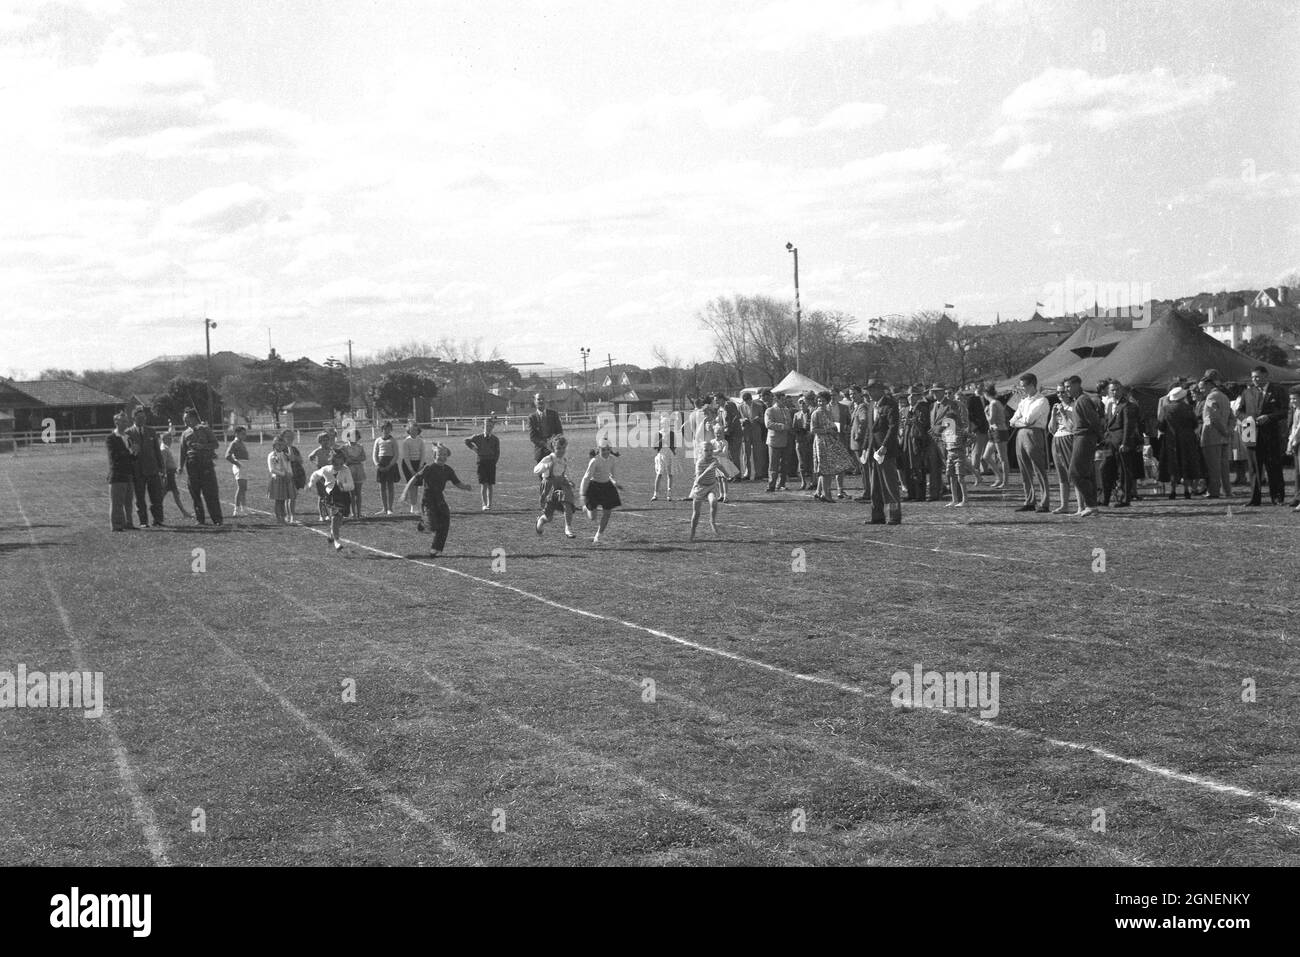 1950s, historical, parents and teachers watching young children take part in a running race, the 100 yard dash, outside in a grass field at a primary school sports day, England, UK. Stock Photo